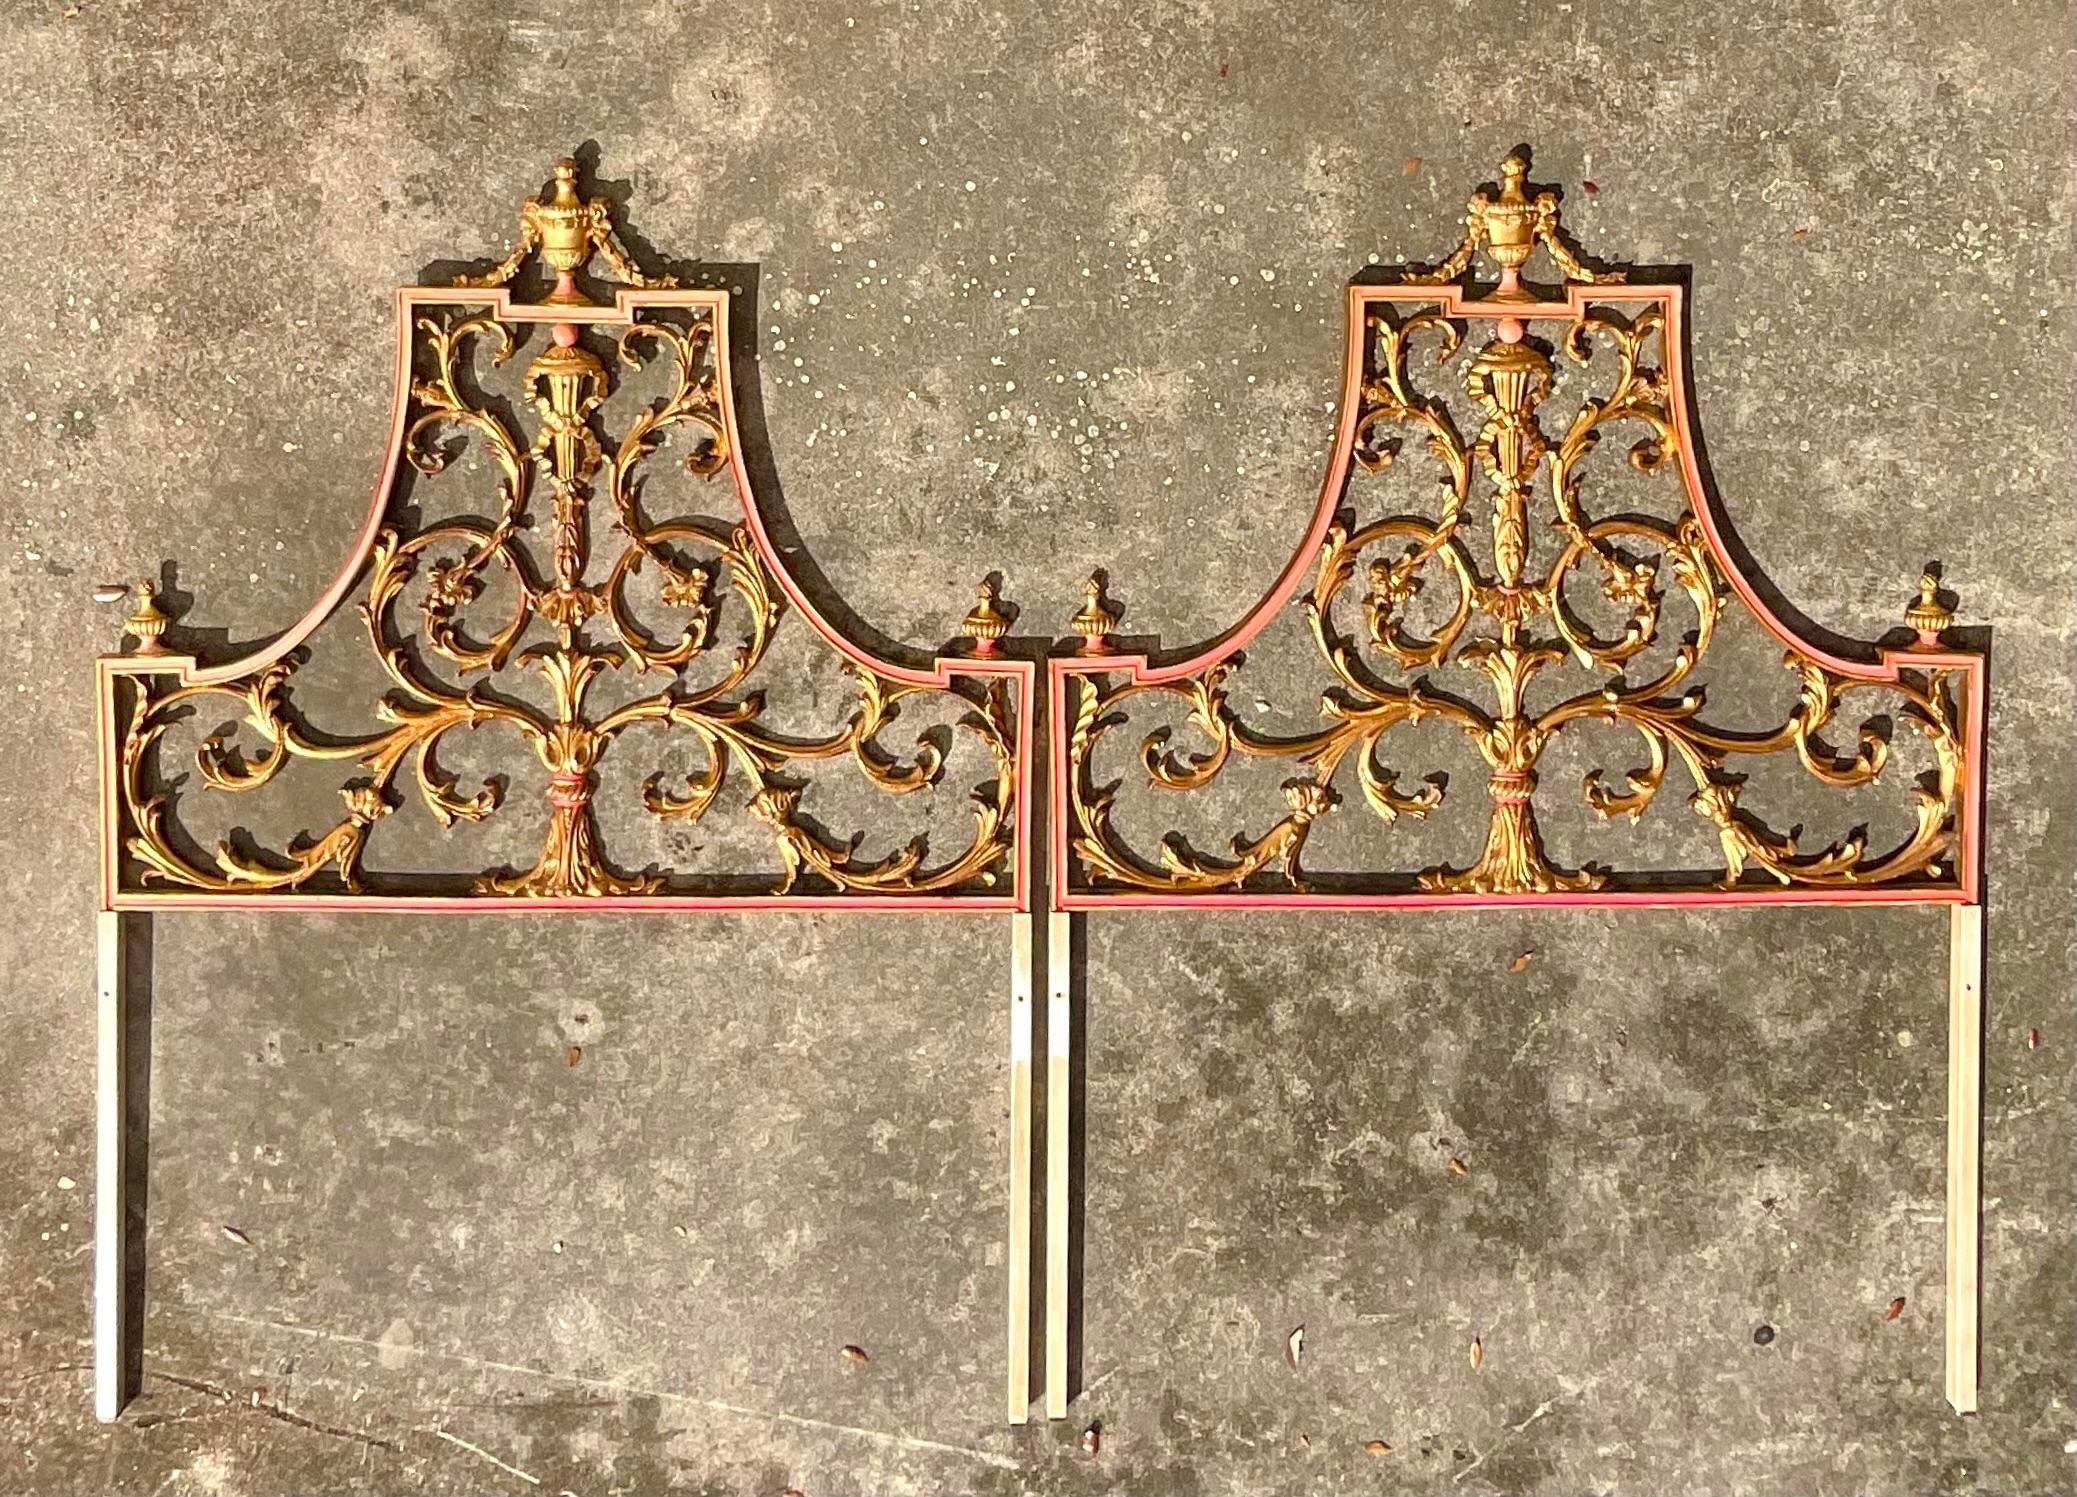 A spectacular pair of vintage Italian twin headboards. Made by the legendary Palladio group. Beautiful gilt over metal in a chic scroll design. Tipped in a deep orange color. Tagged. Acquired from a Palm Beach estate.